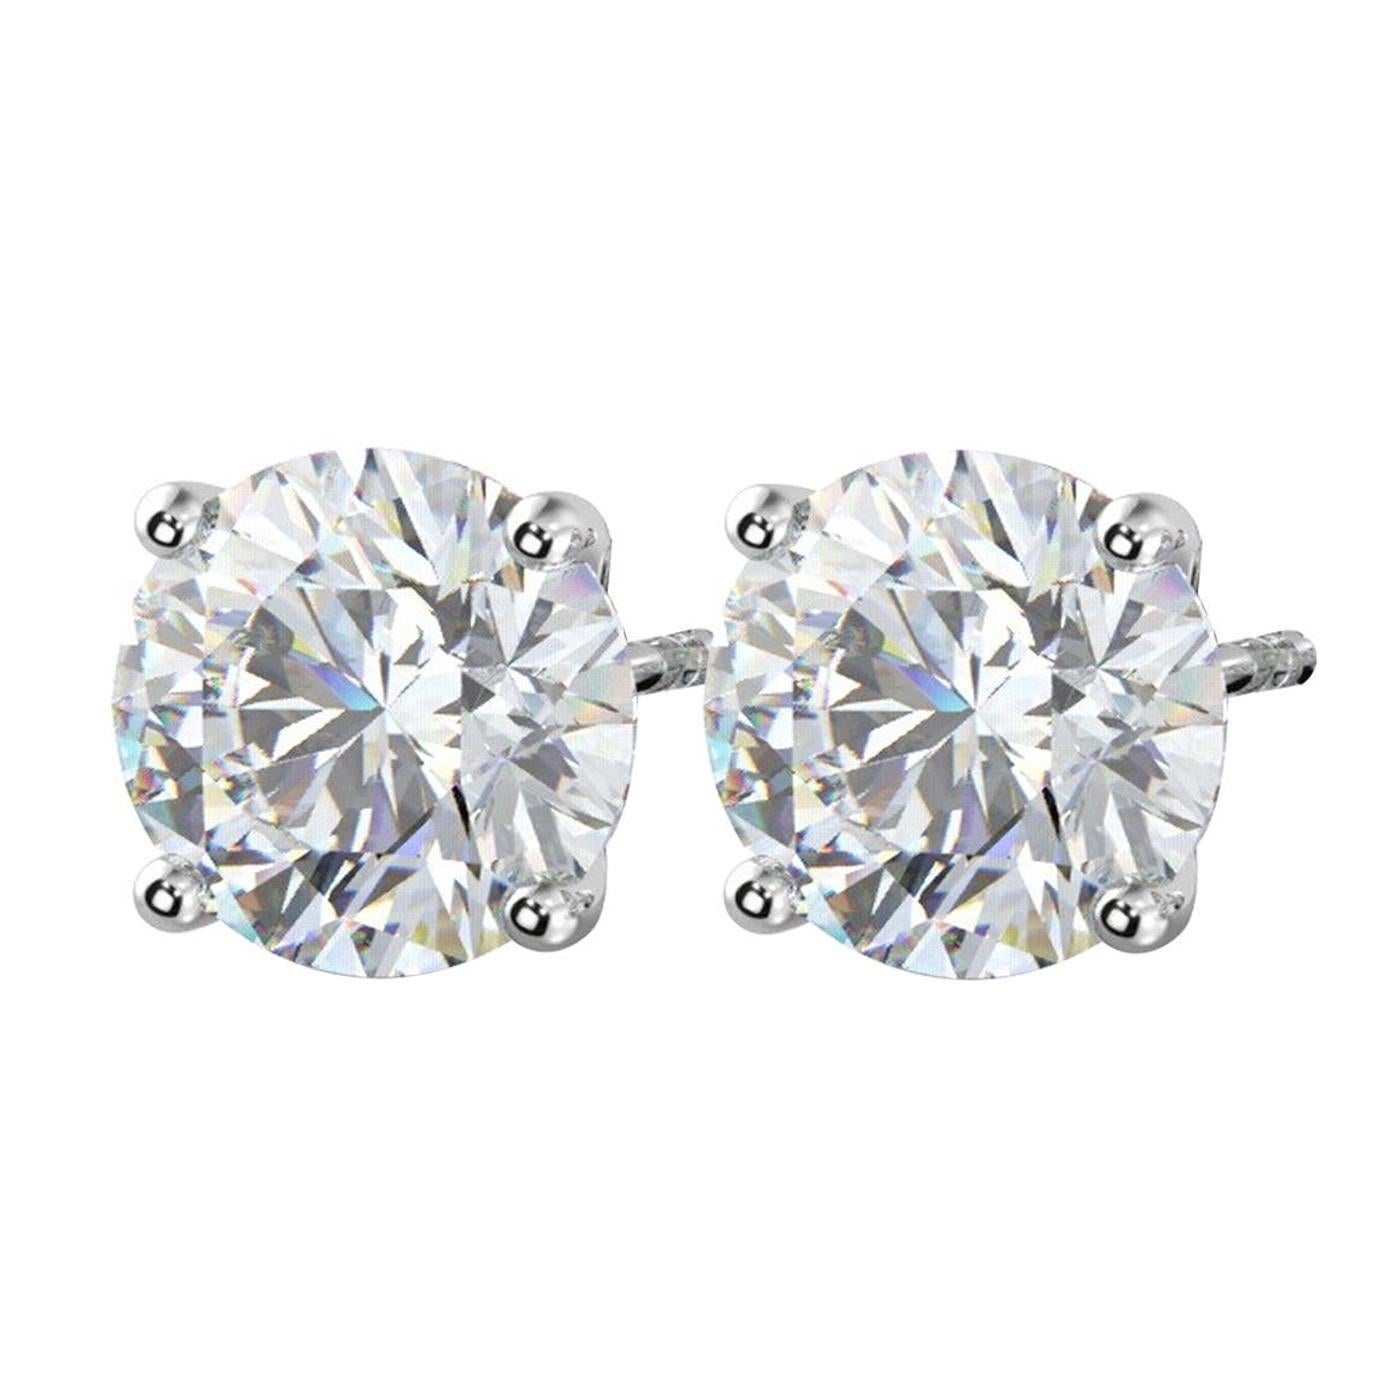 Modernist 4.02ct Natural Round Diamonds Stud Earring 14K White Gold 4 Prong Basket Setting For Sale